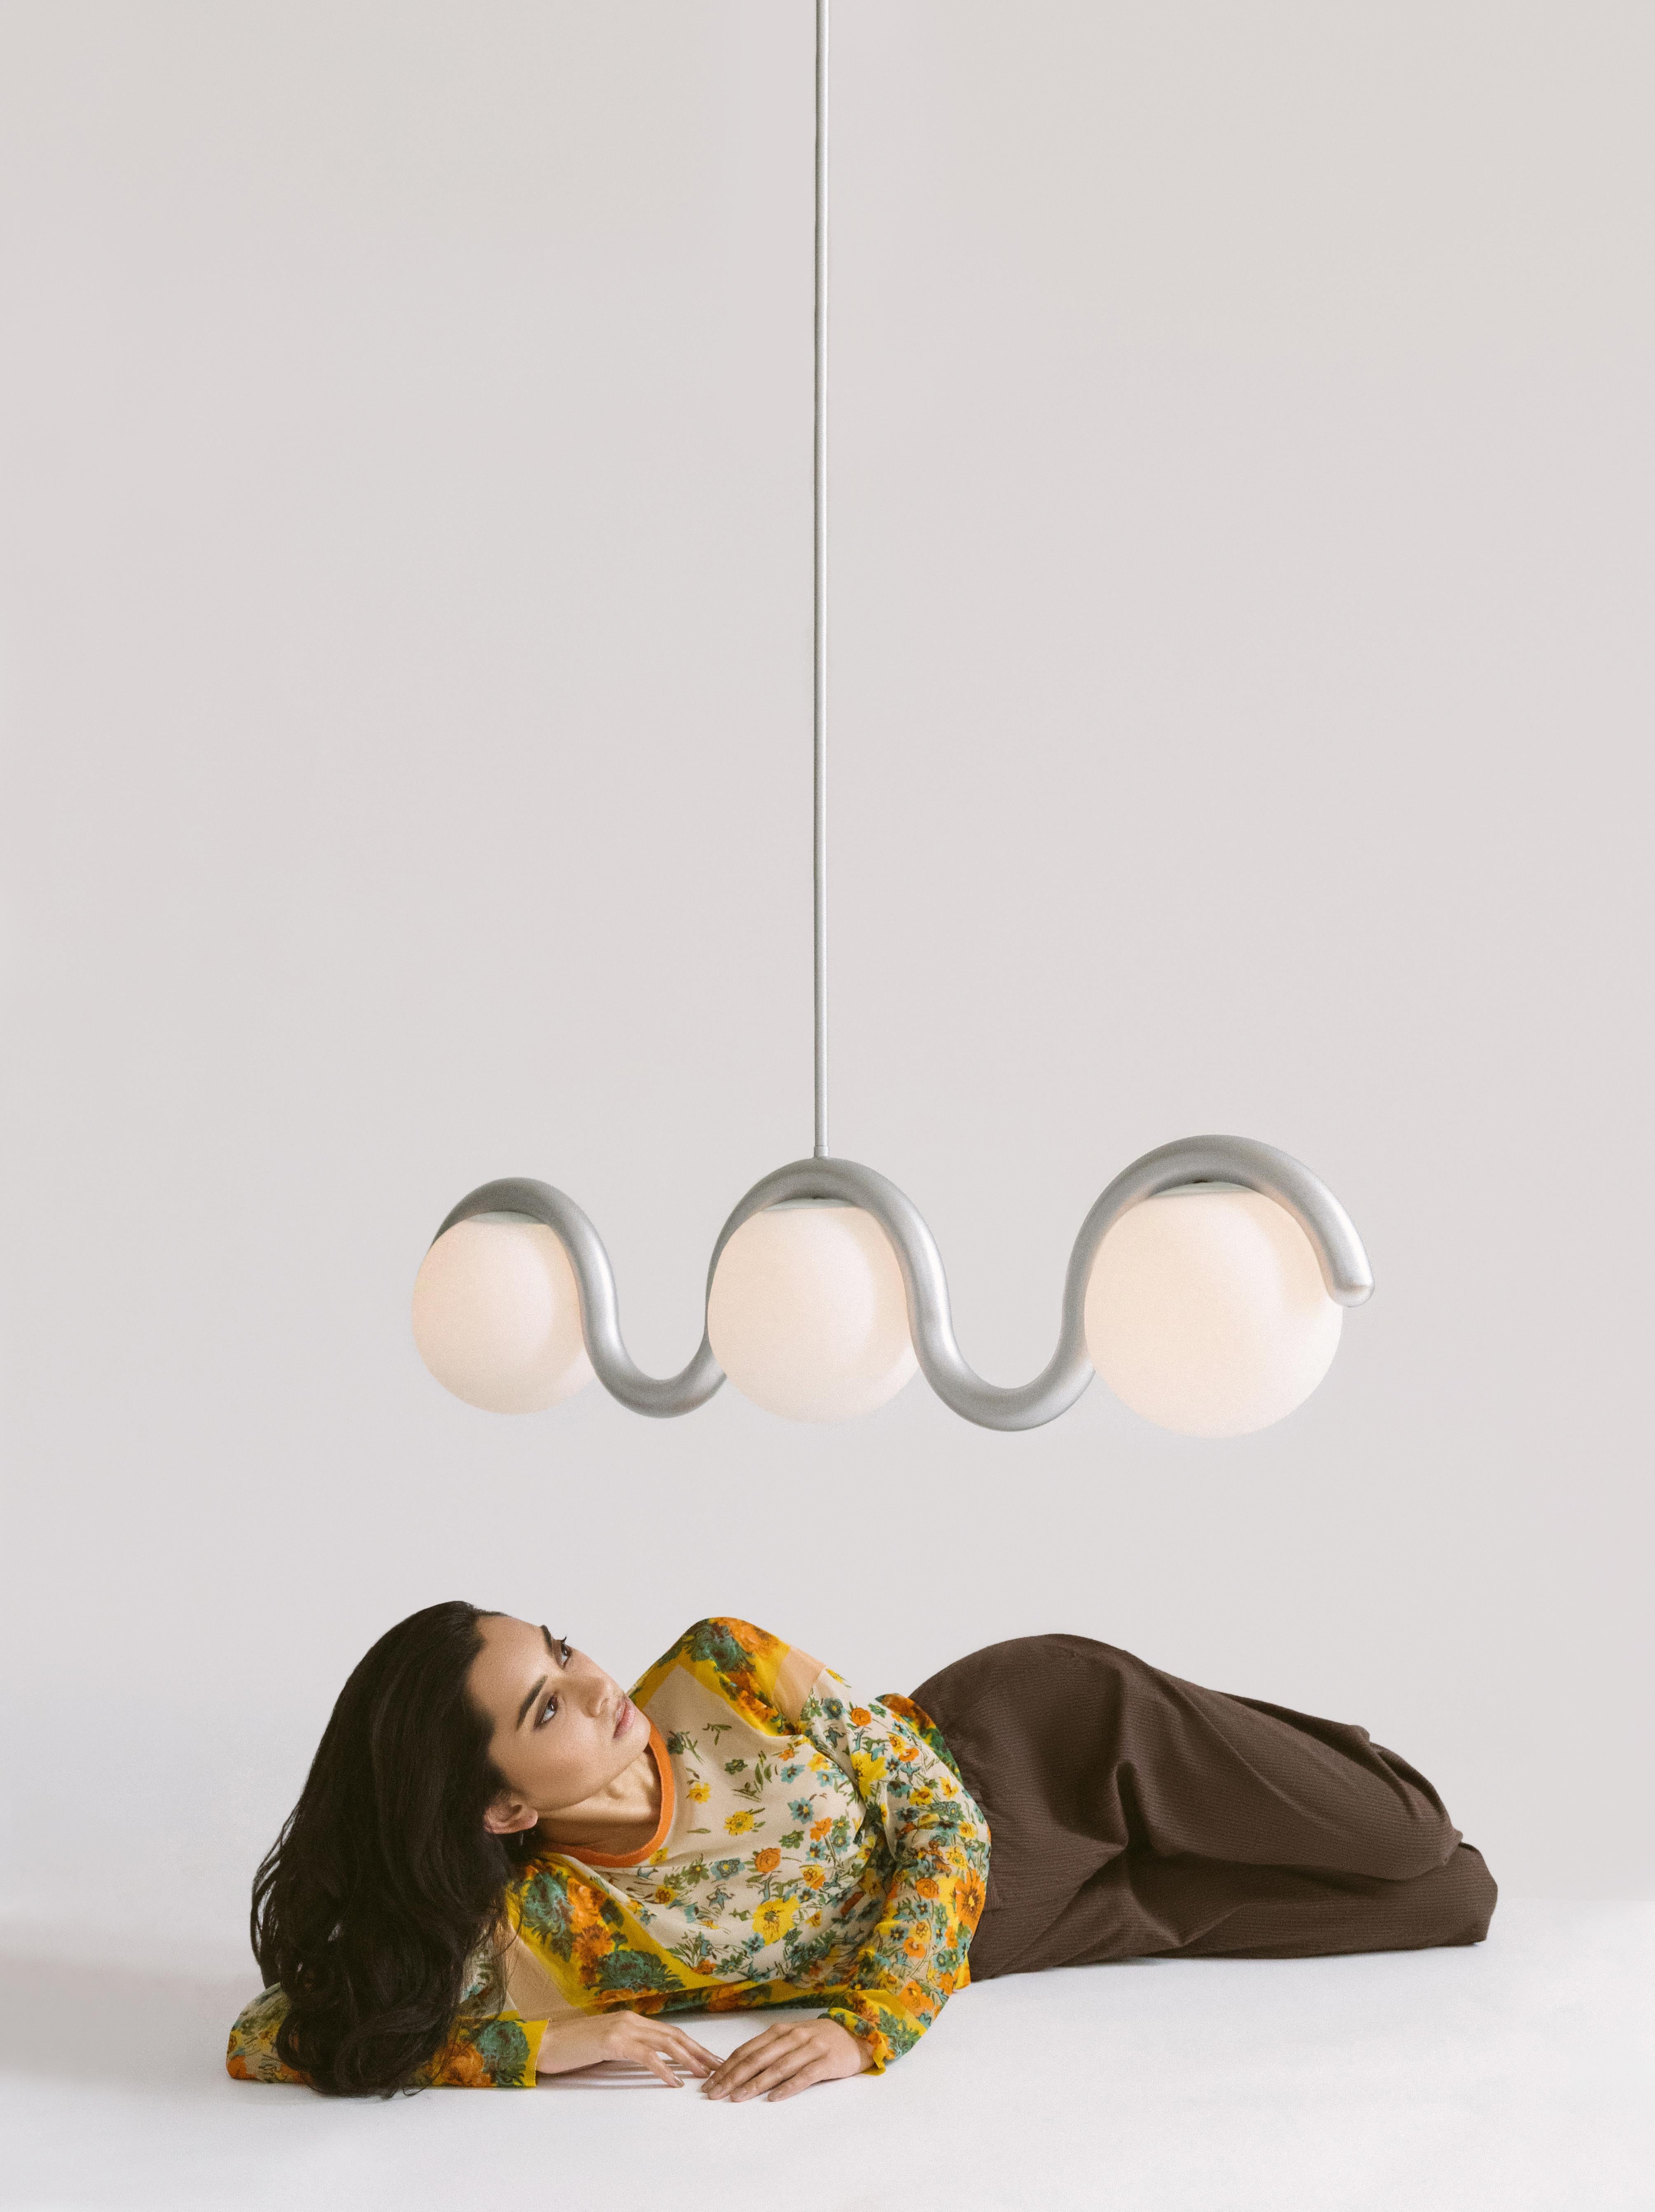 The scalloped design of the Lenox series is a sophisticated and modern take on Art Nouveau. The metal tube bends around the shape of the globe light, creating a flow of movement and synchrony between the two parts. The fixture is completely